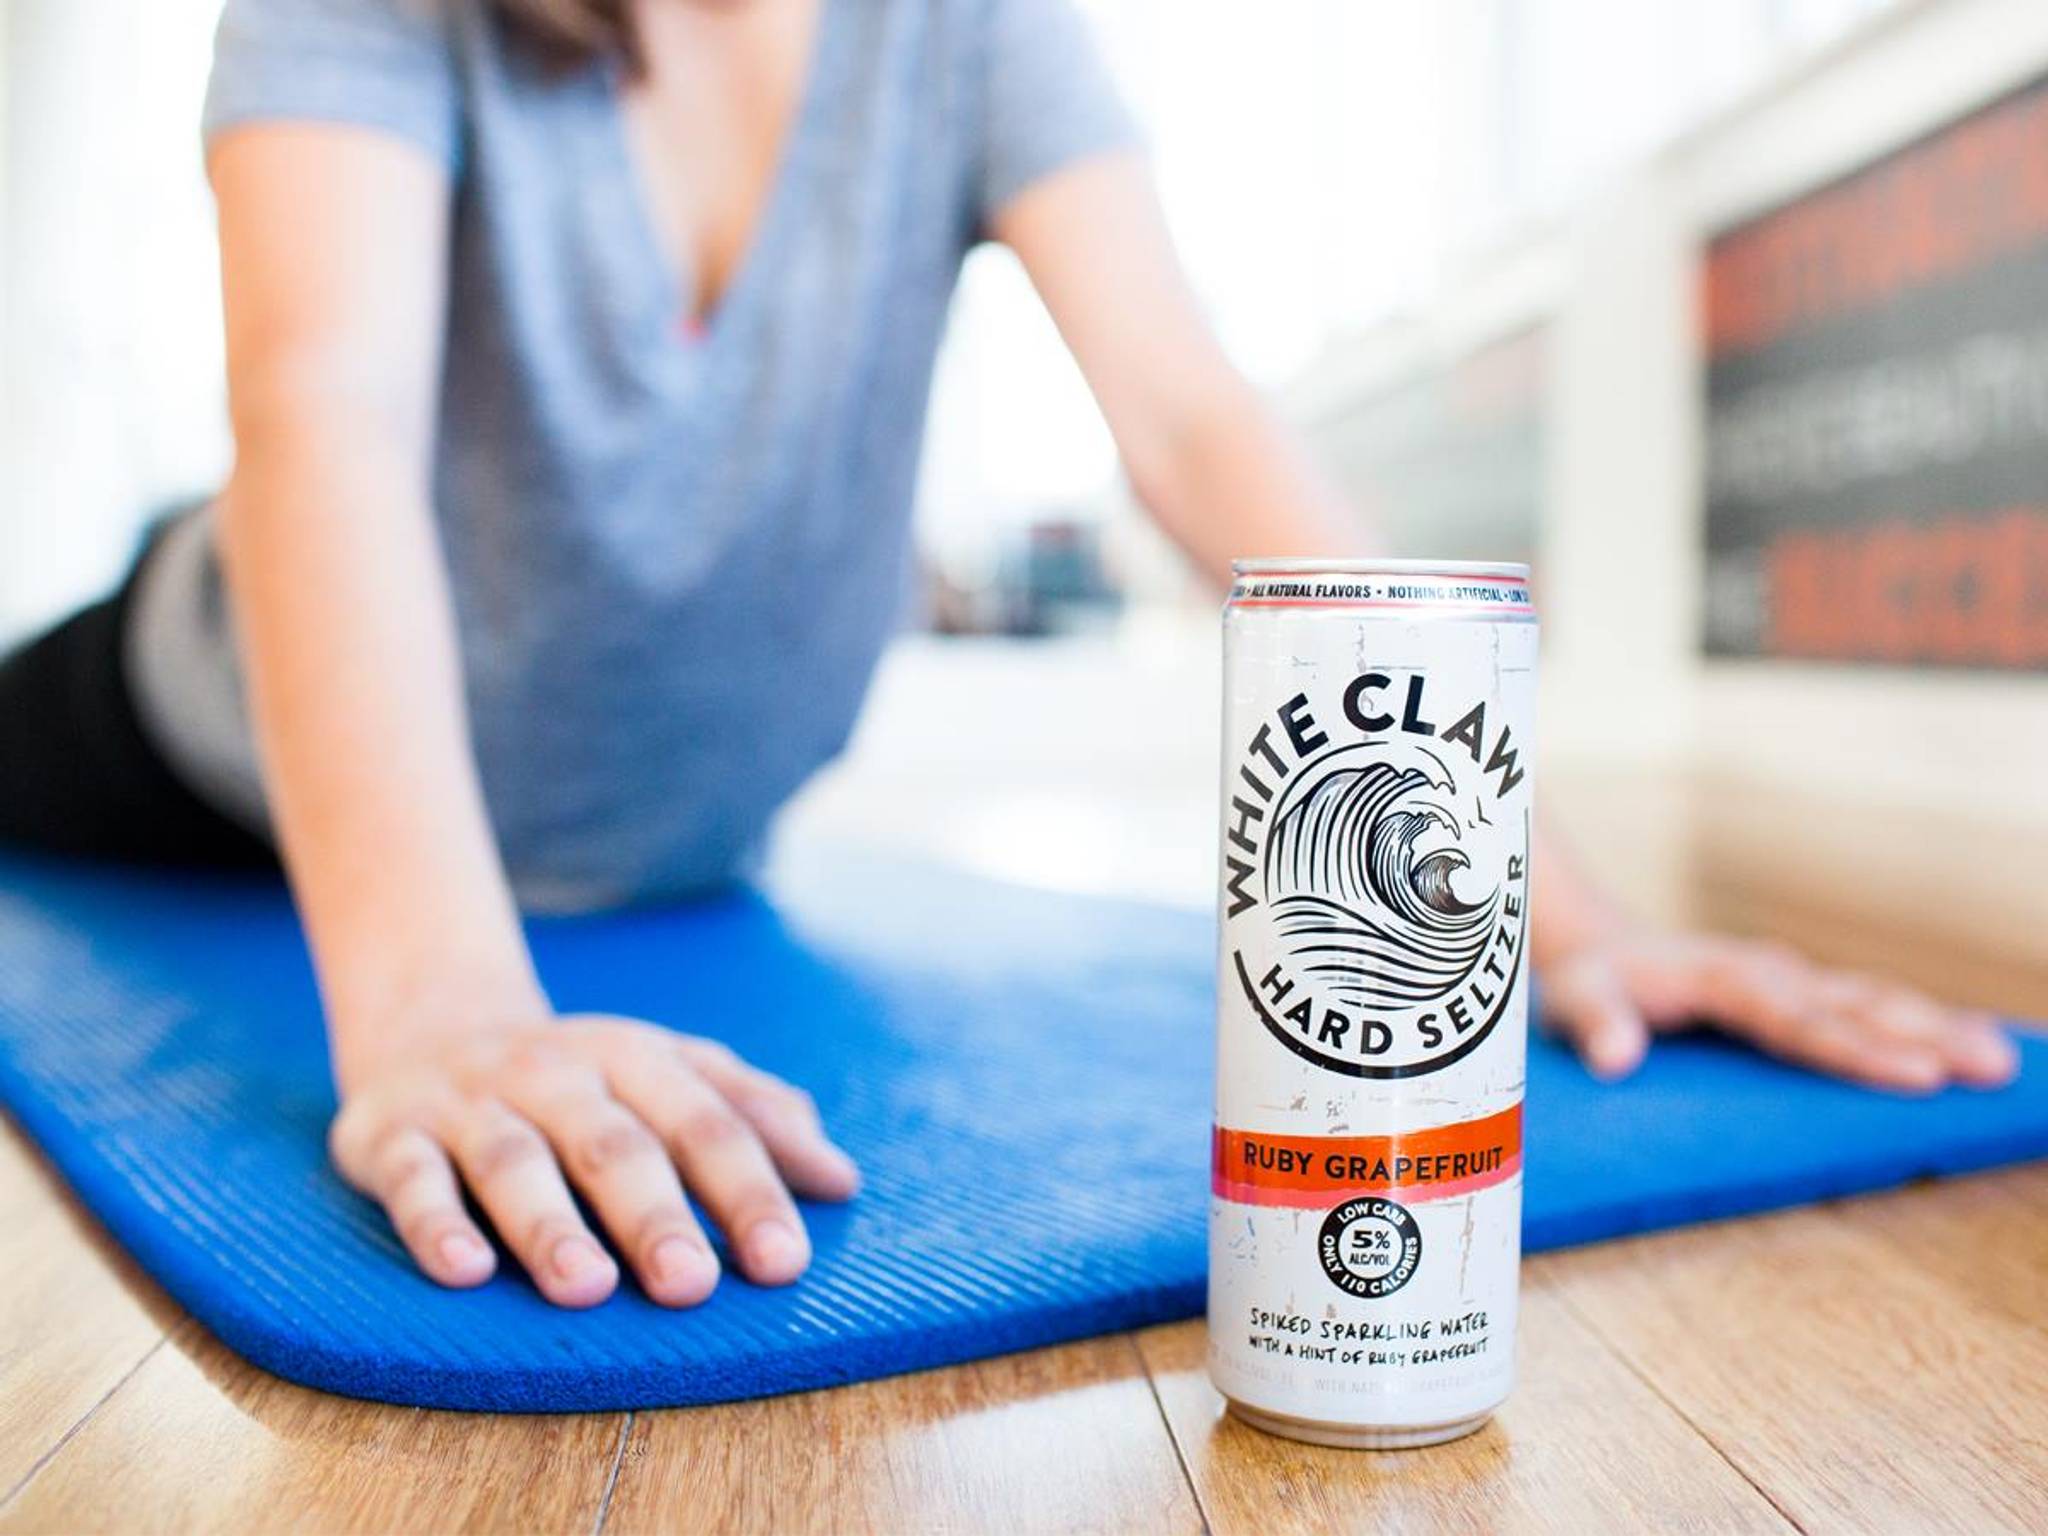 White Claw: the seltzer that took over summer 2019